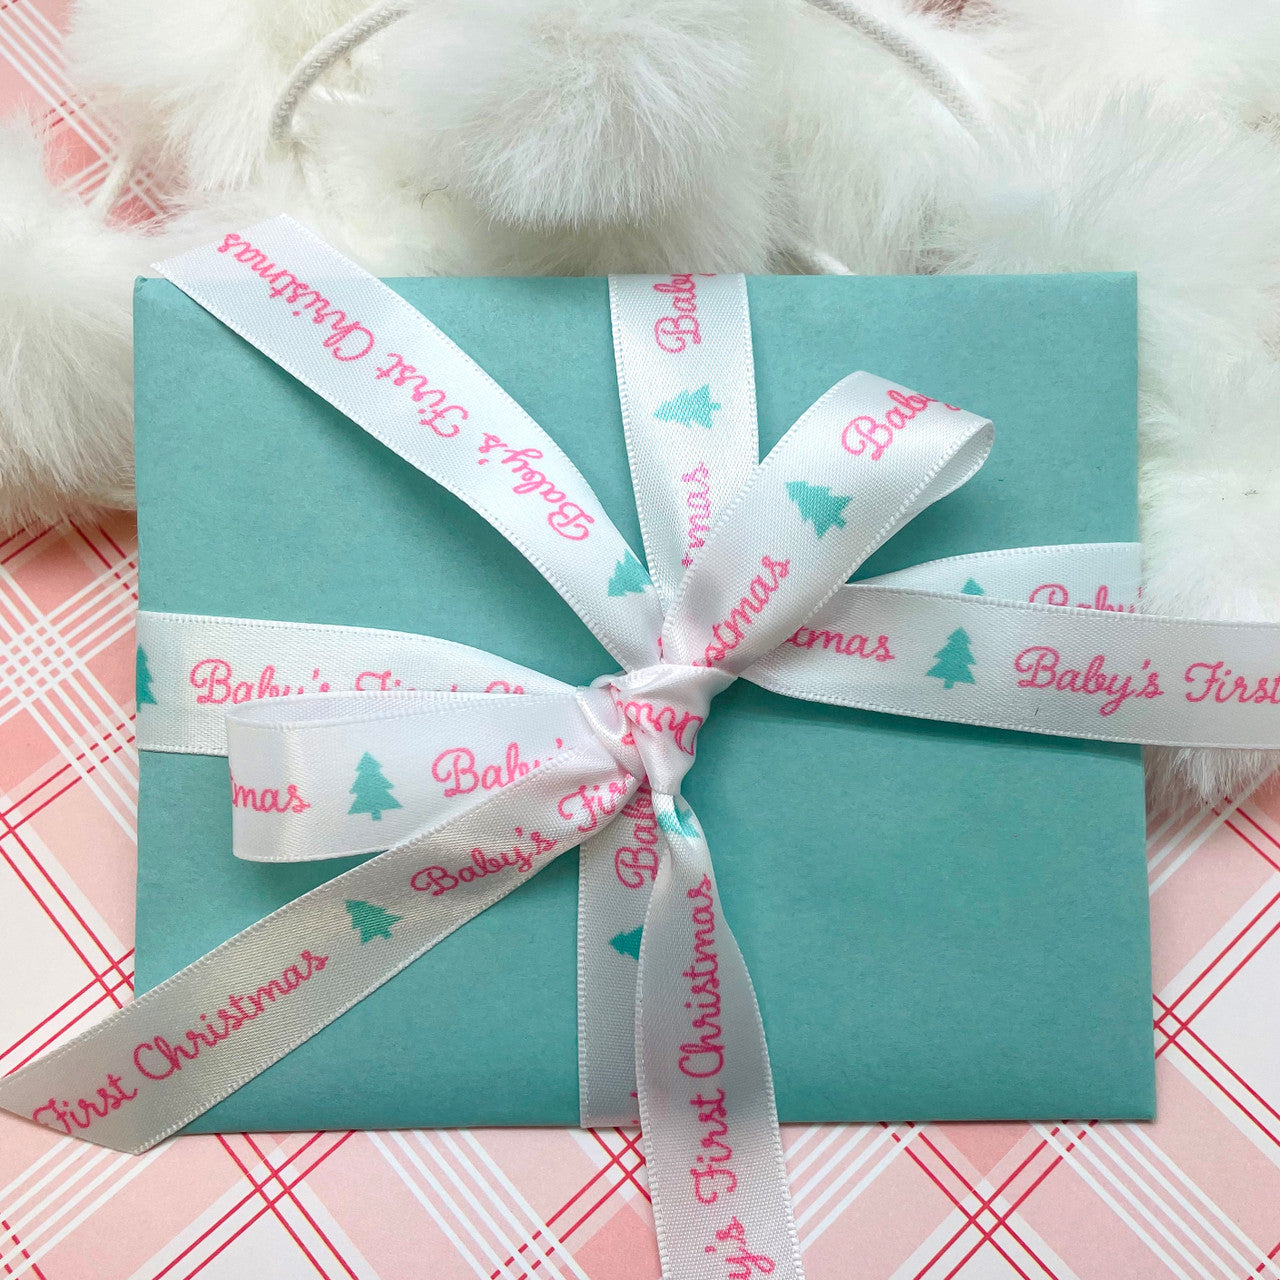 Our Baby's first Christmas ribbon is the perfect tie for Baby's gifts large and small! 